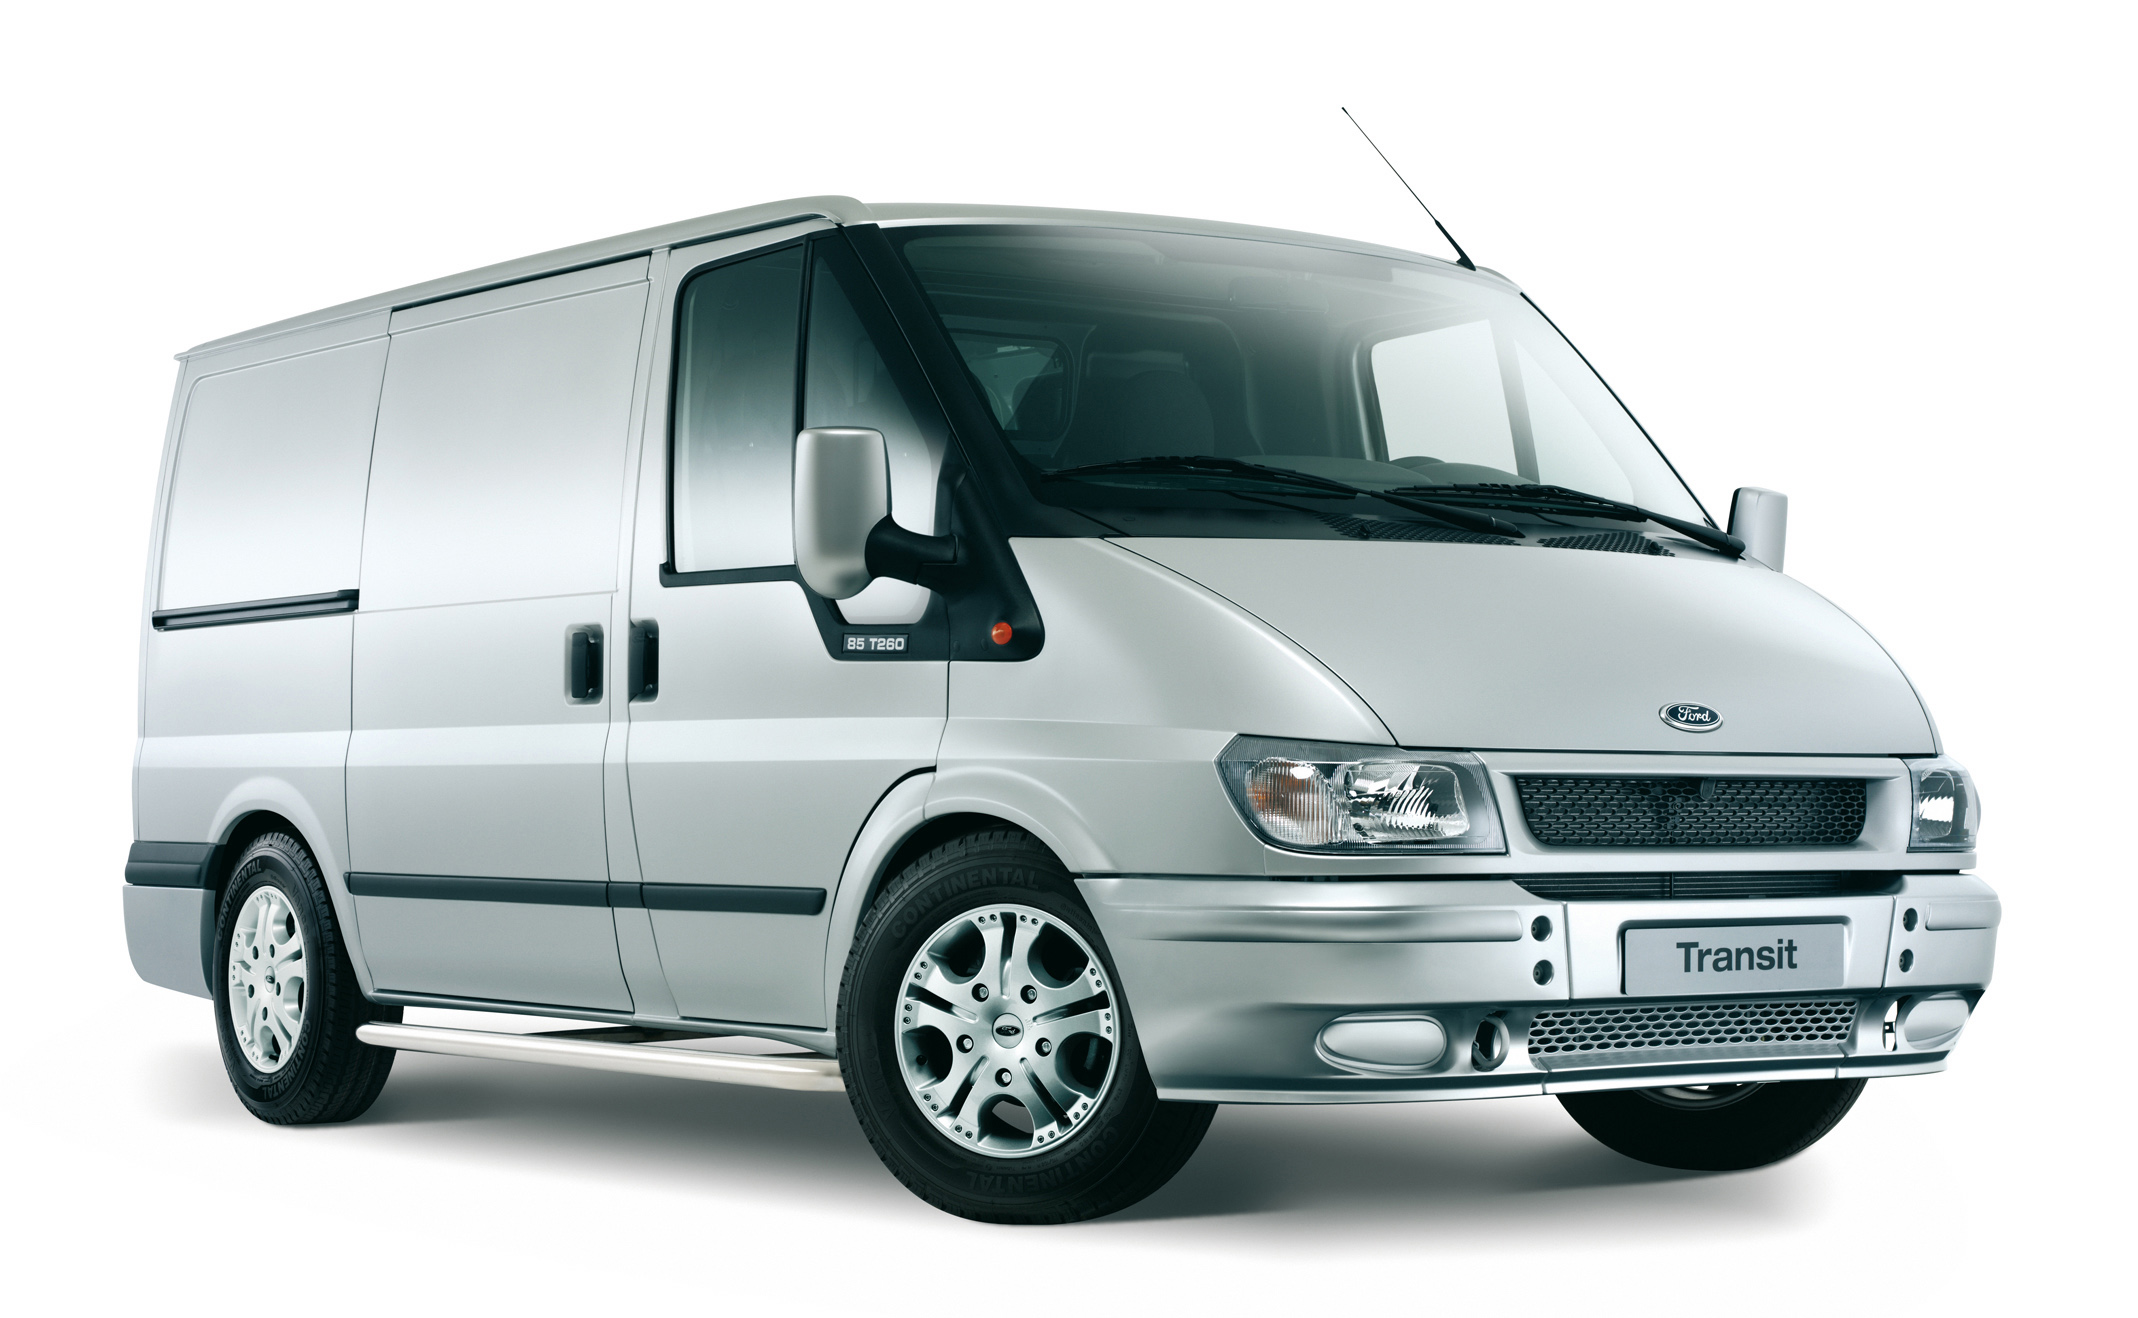 Форд транзит 2.0 2000 2006. Ford Transit 2000. Ford Transit '2000–06. Ford Транзит 2000. Ford Transit (2000-2005).